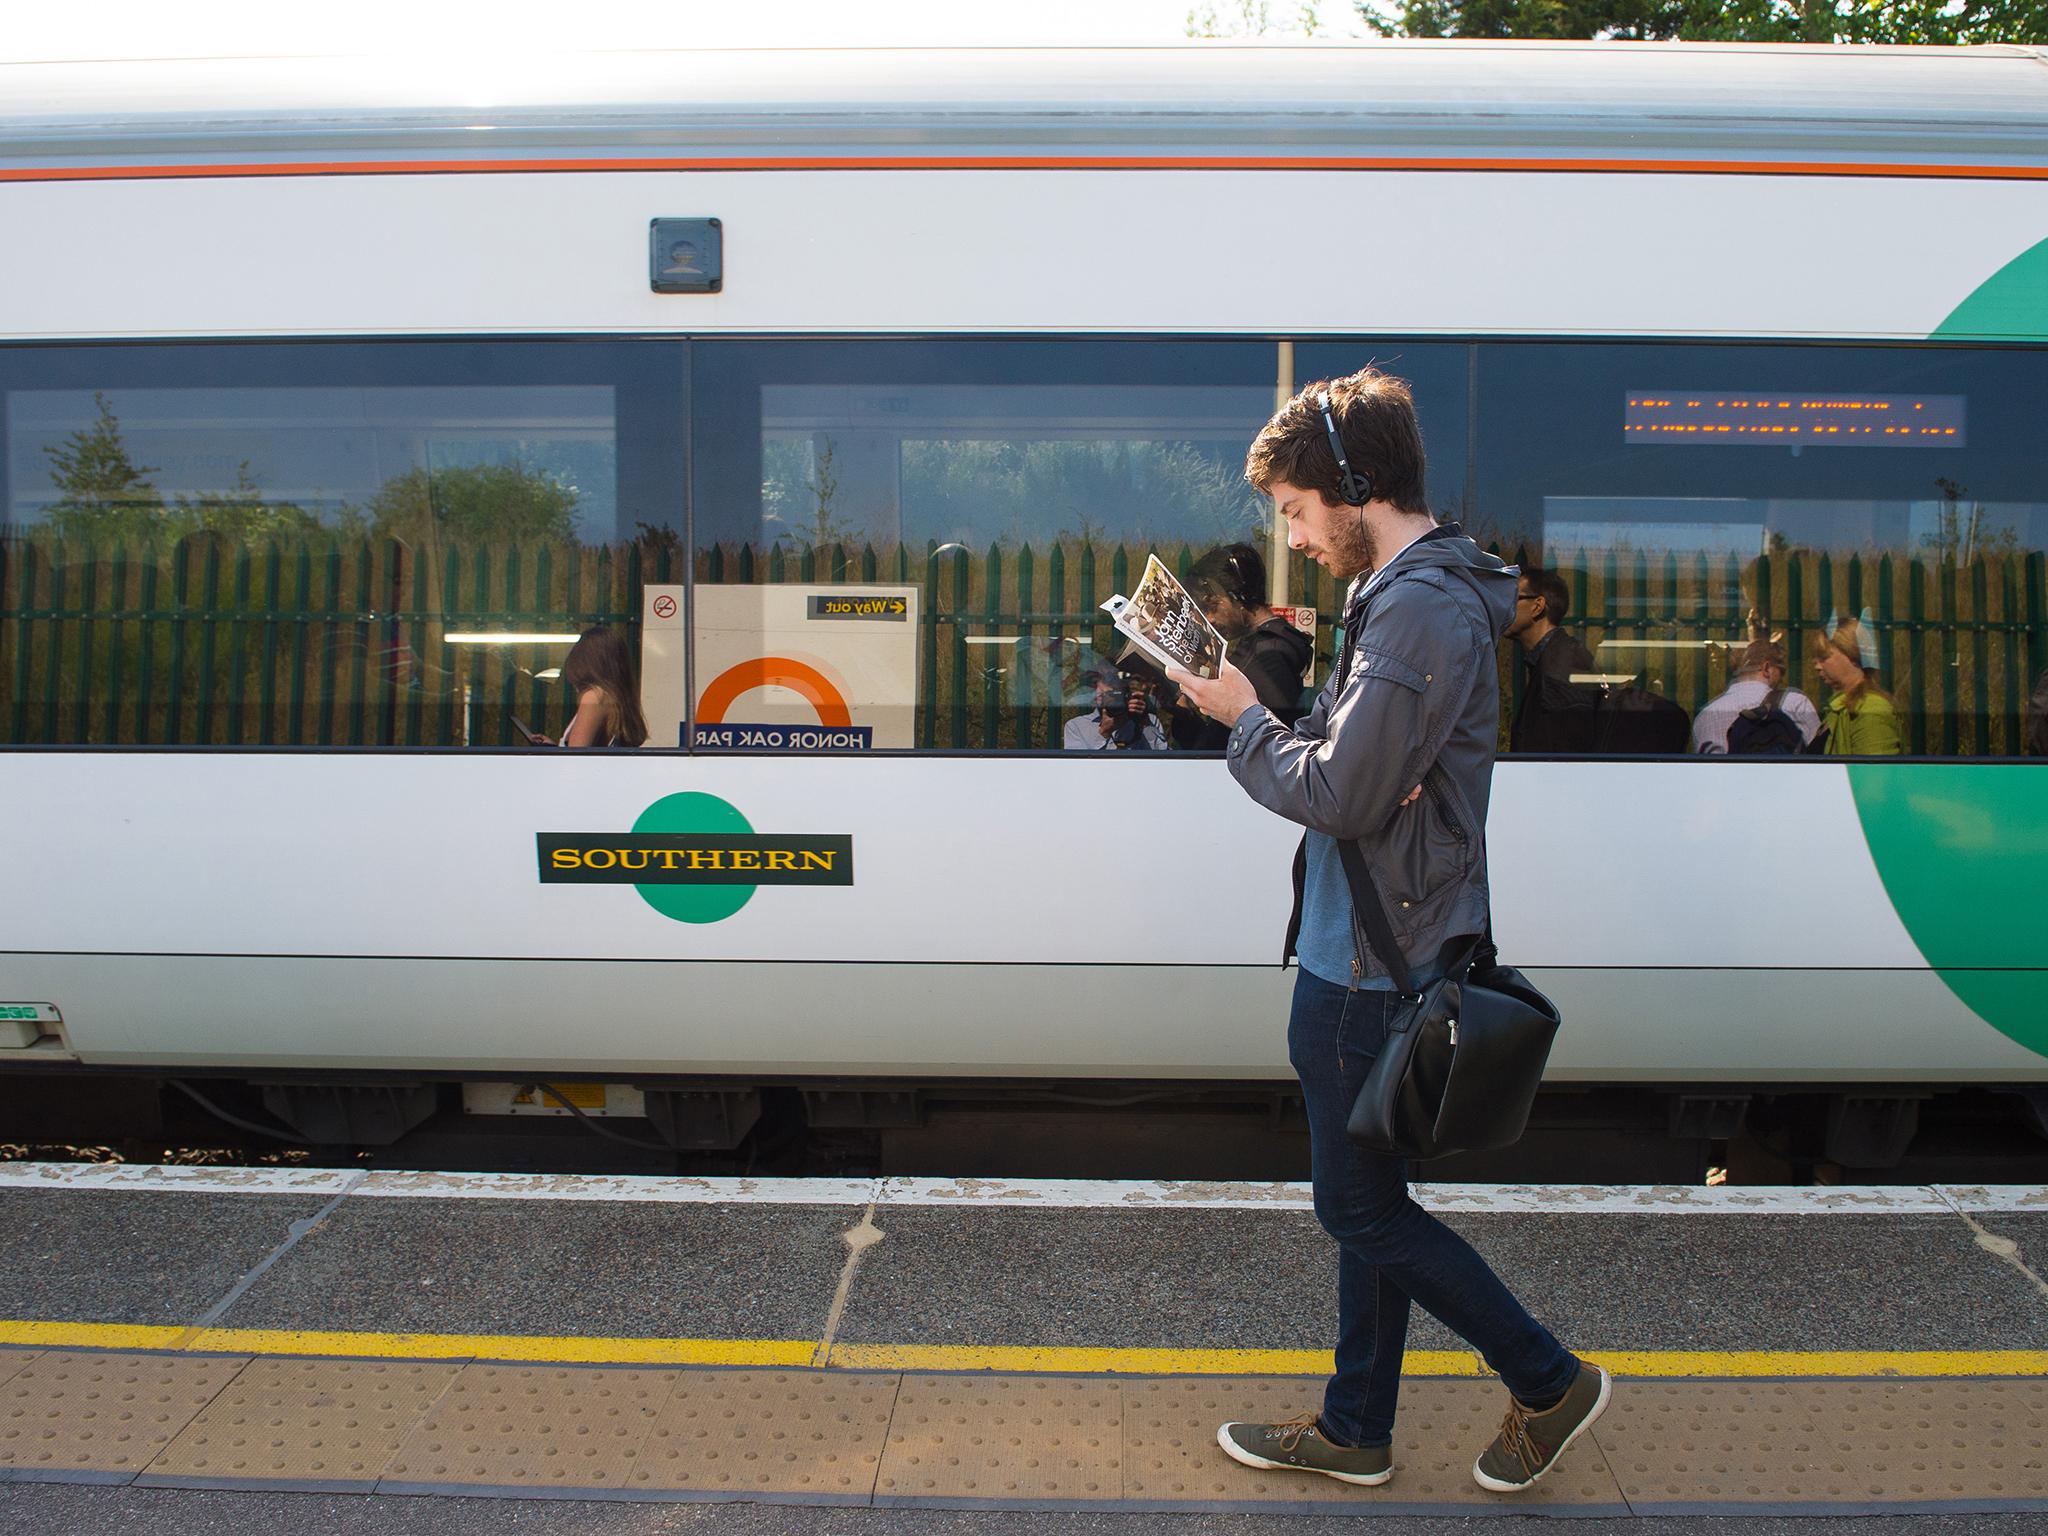 Commuters don't always have the option to choose when they travel to work